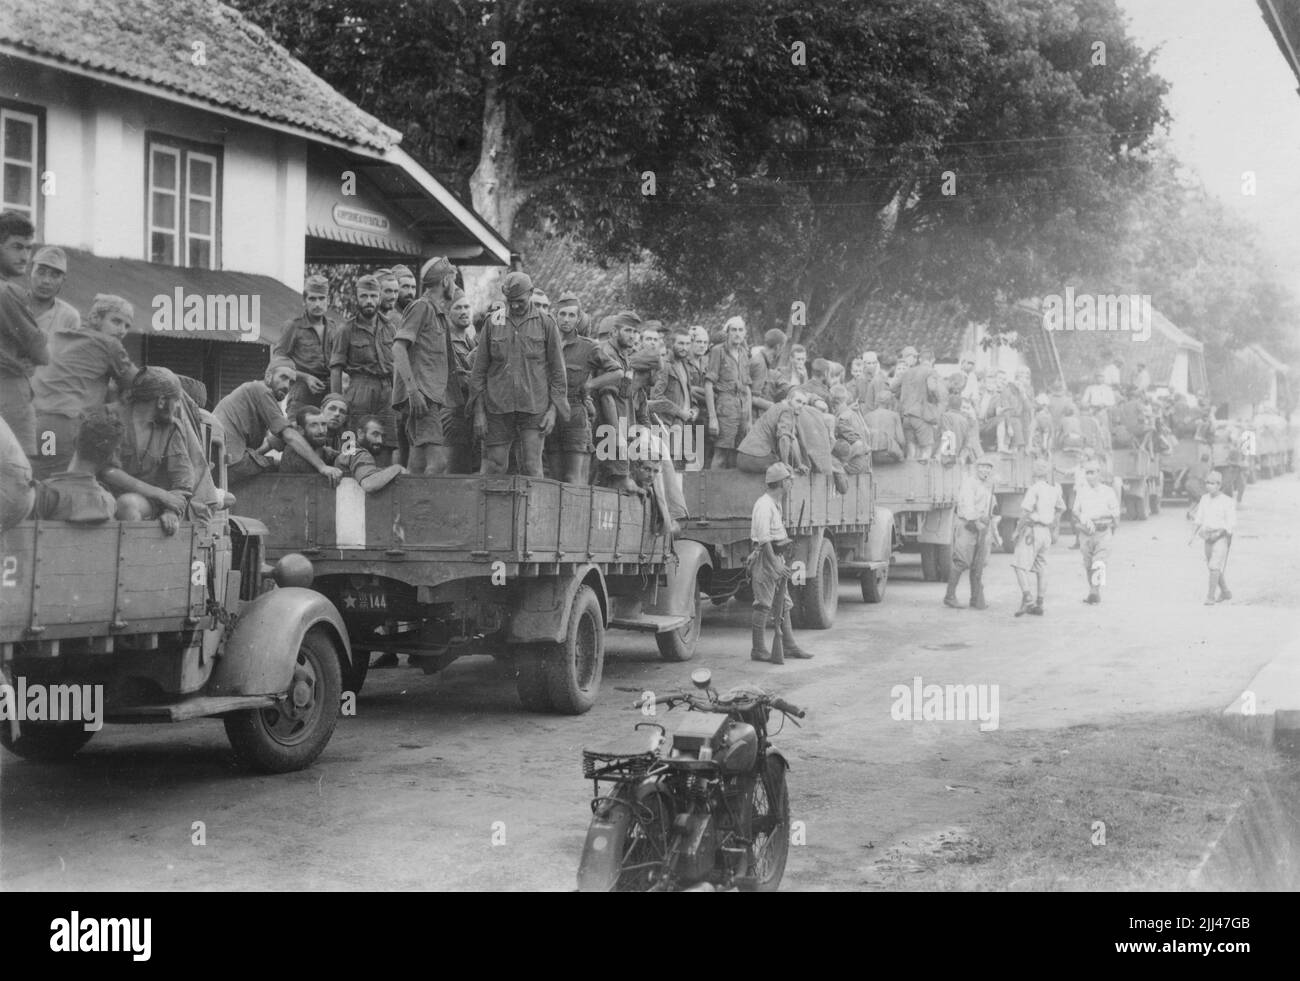 Pacific War, 1941-1945. After their capitulation to the invading Imperial Japanese 16th Army, Royal Netherlands East Indies Army (KNIL) troops are loaded onto trucks and await transport to prisoner-of-war camps, Dutch East Indies, circa March 1942. Stock Photo